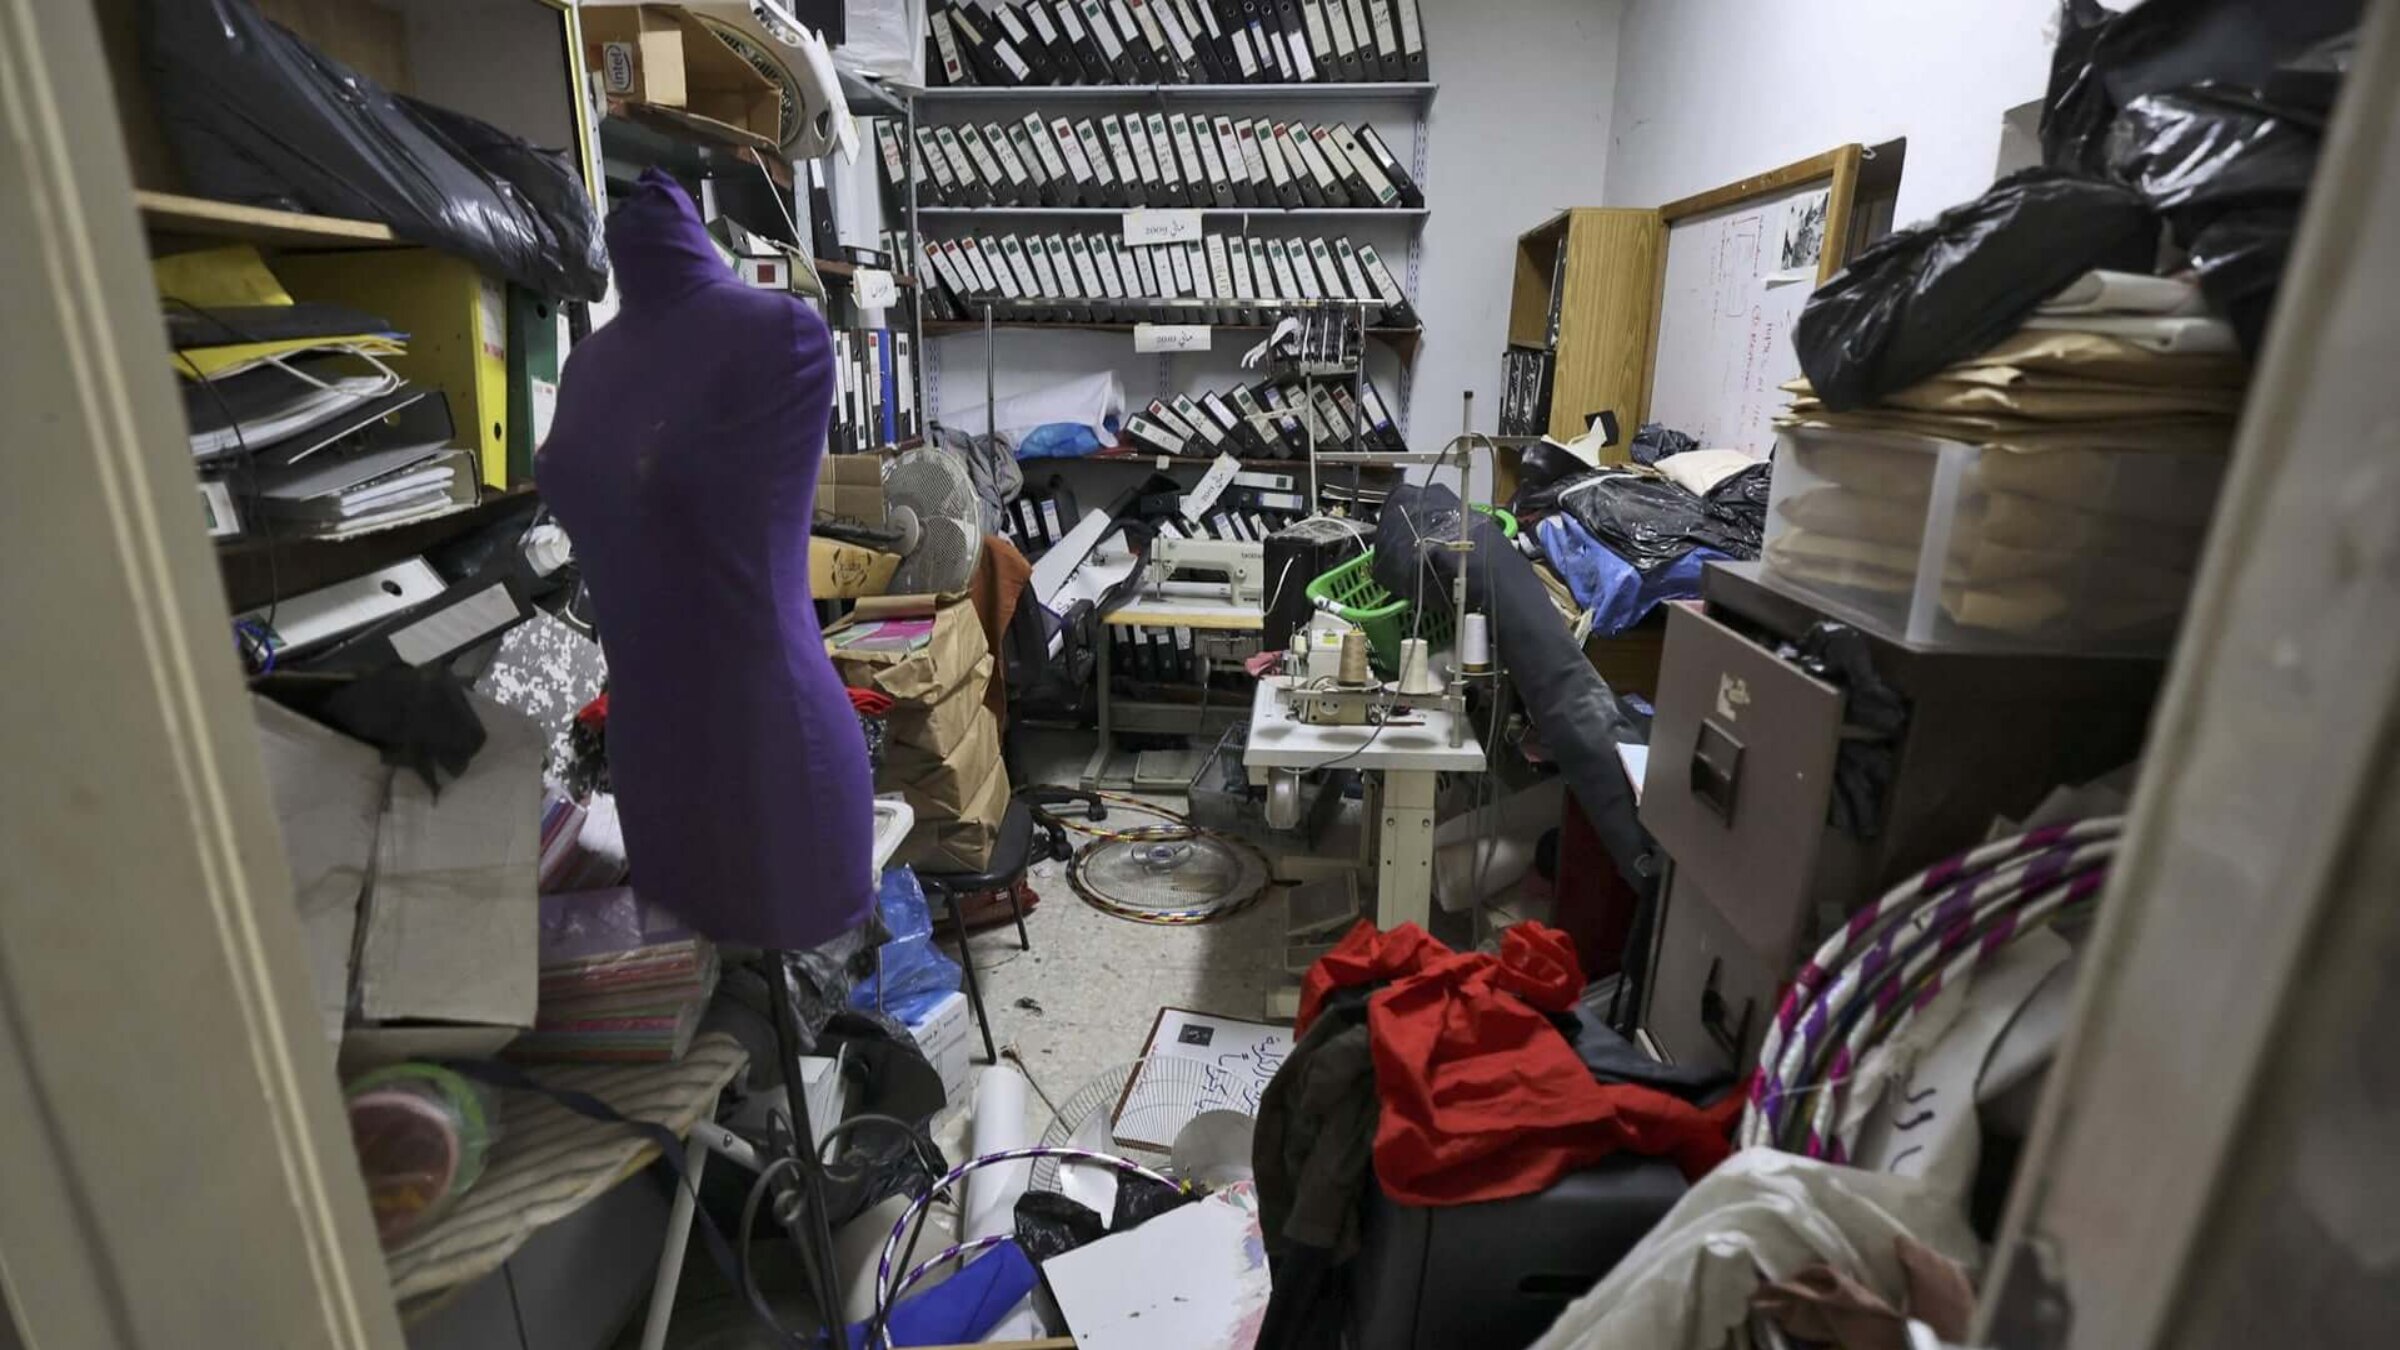 The premises of the Palestinian NGO Union of Palestinian Women's Committees in the West Bank city of Ramallah, after it was raided by Israeli forces on August 18, 2022.